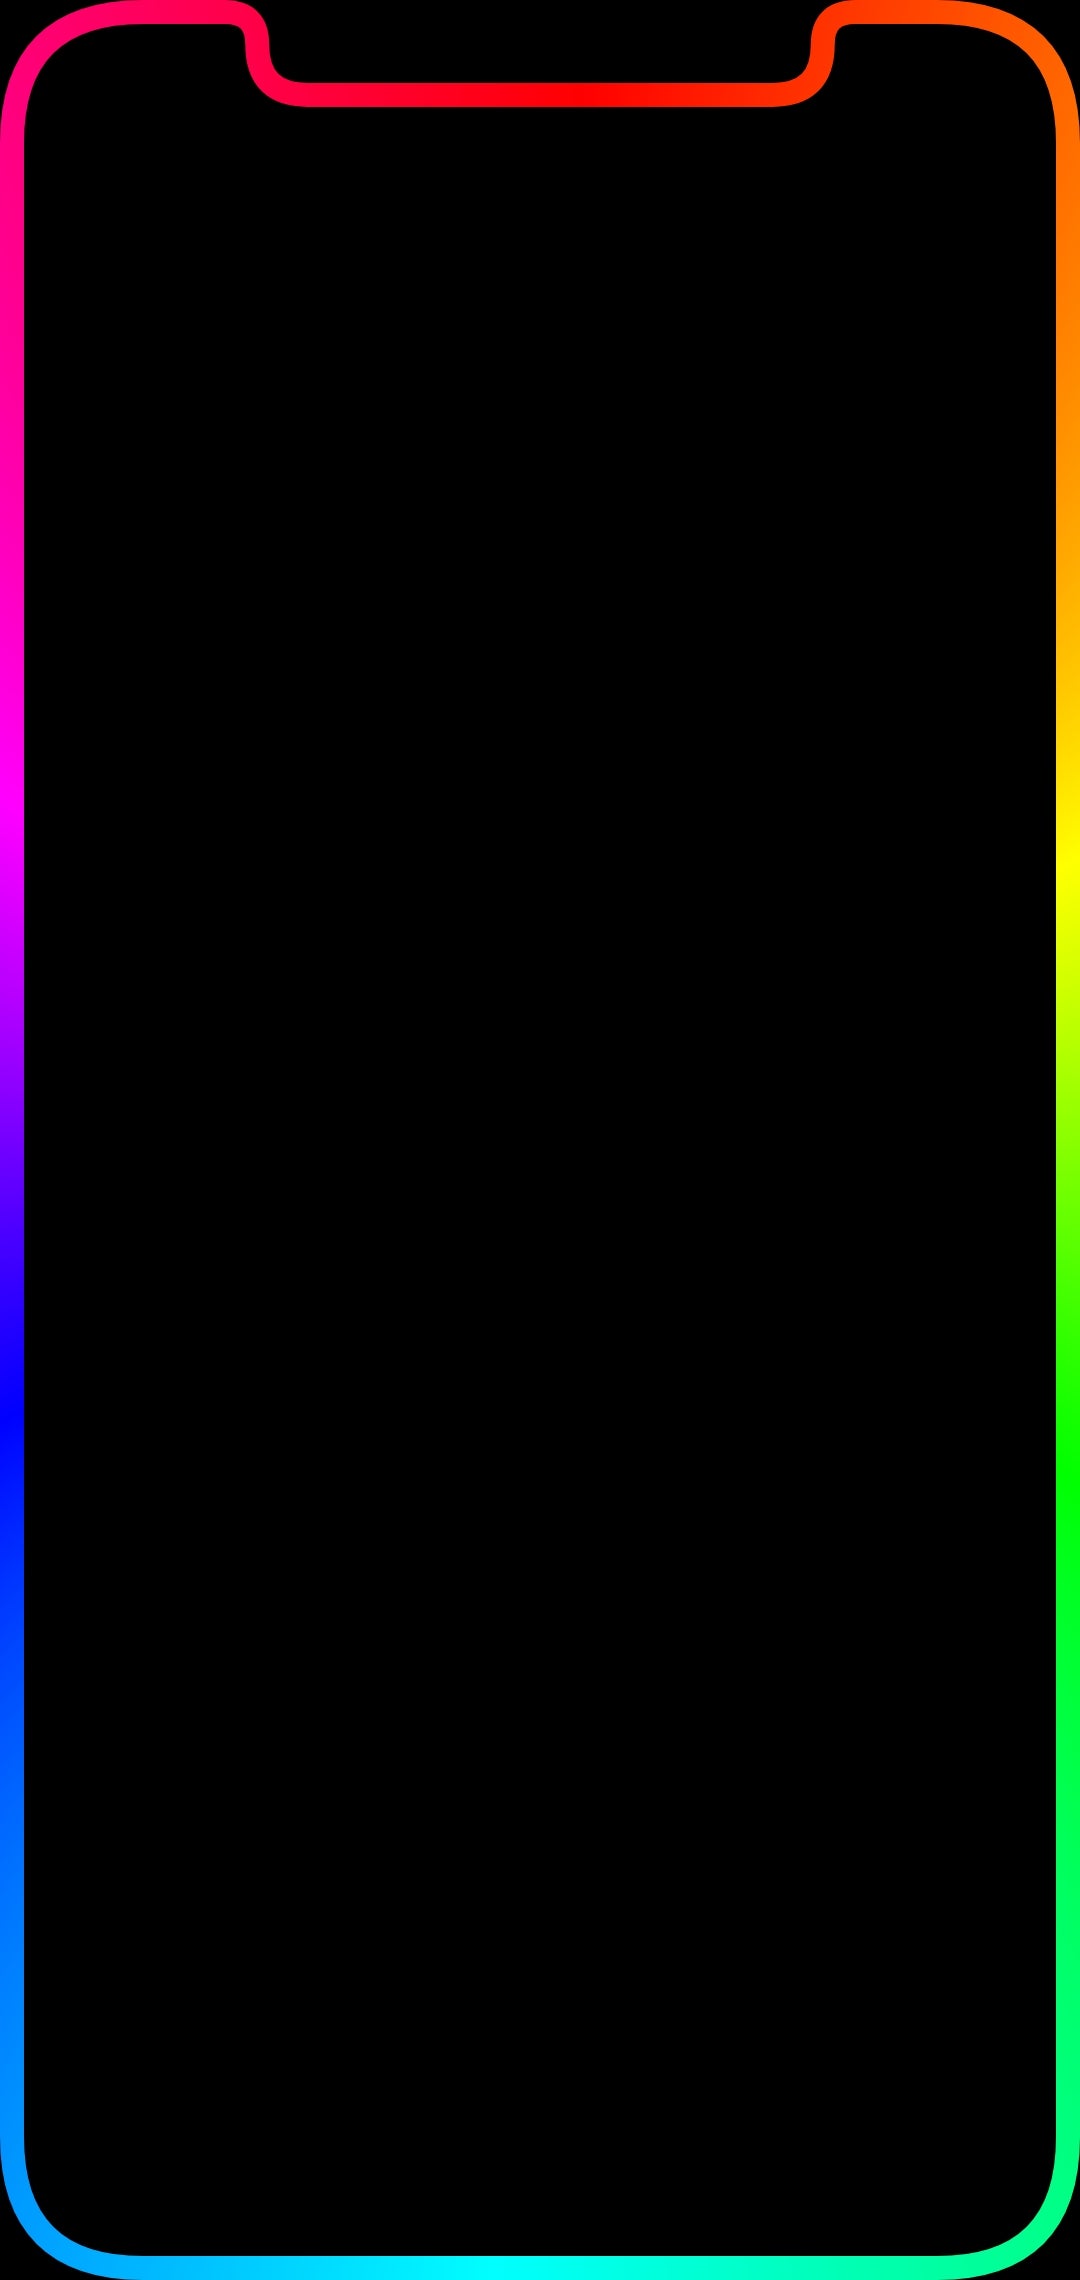 Rgb border for IPhone 11 pro max